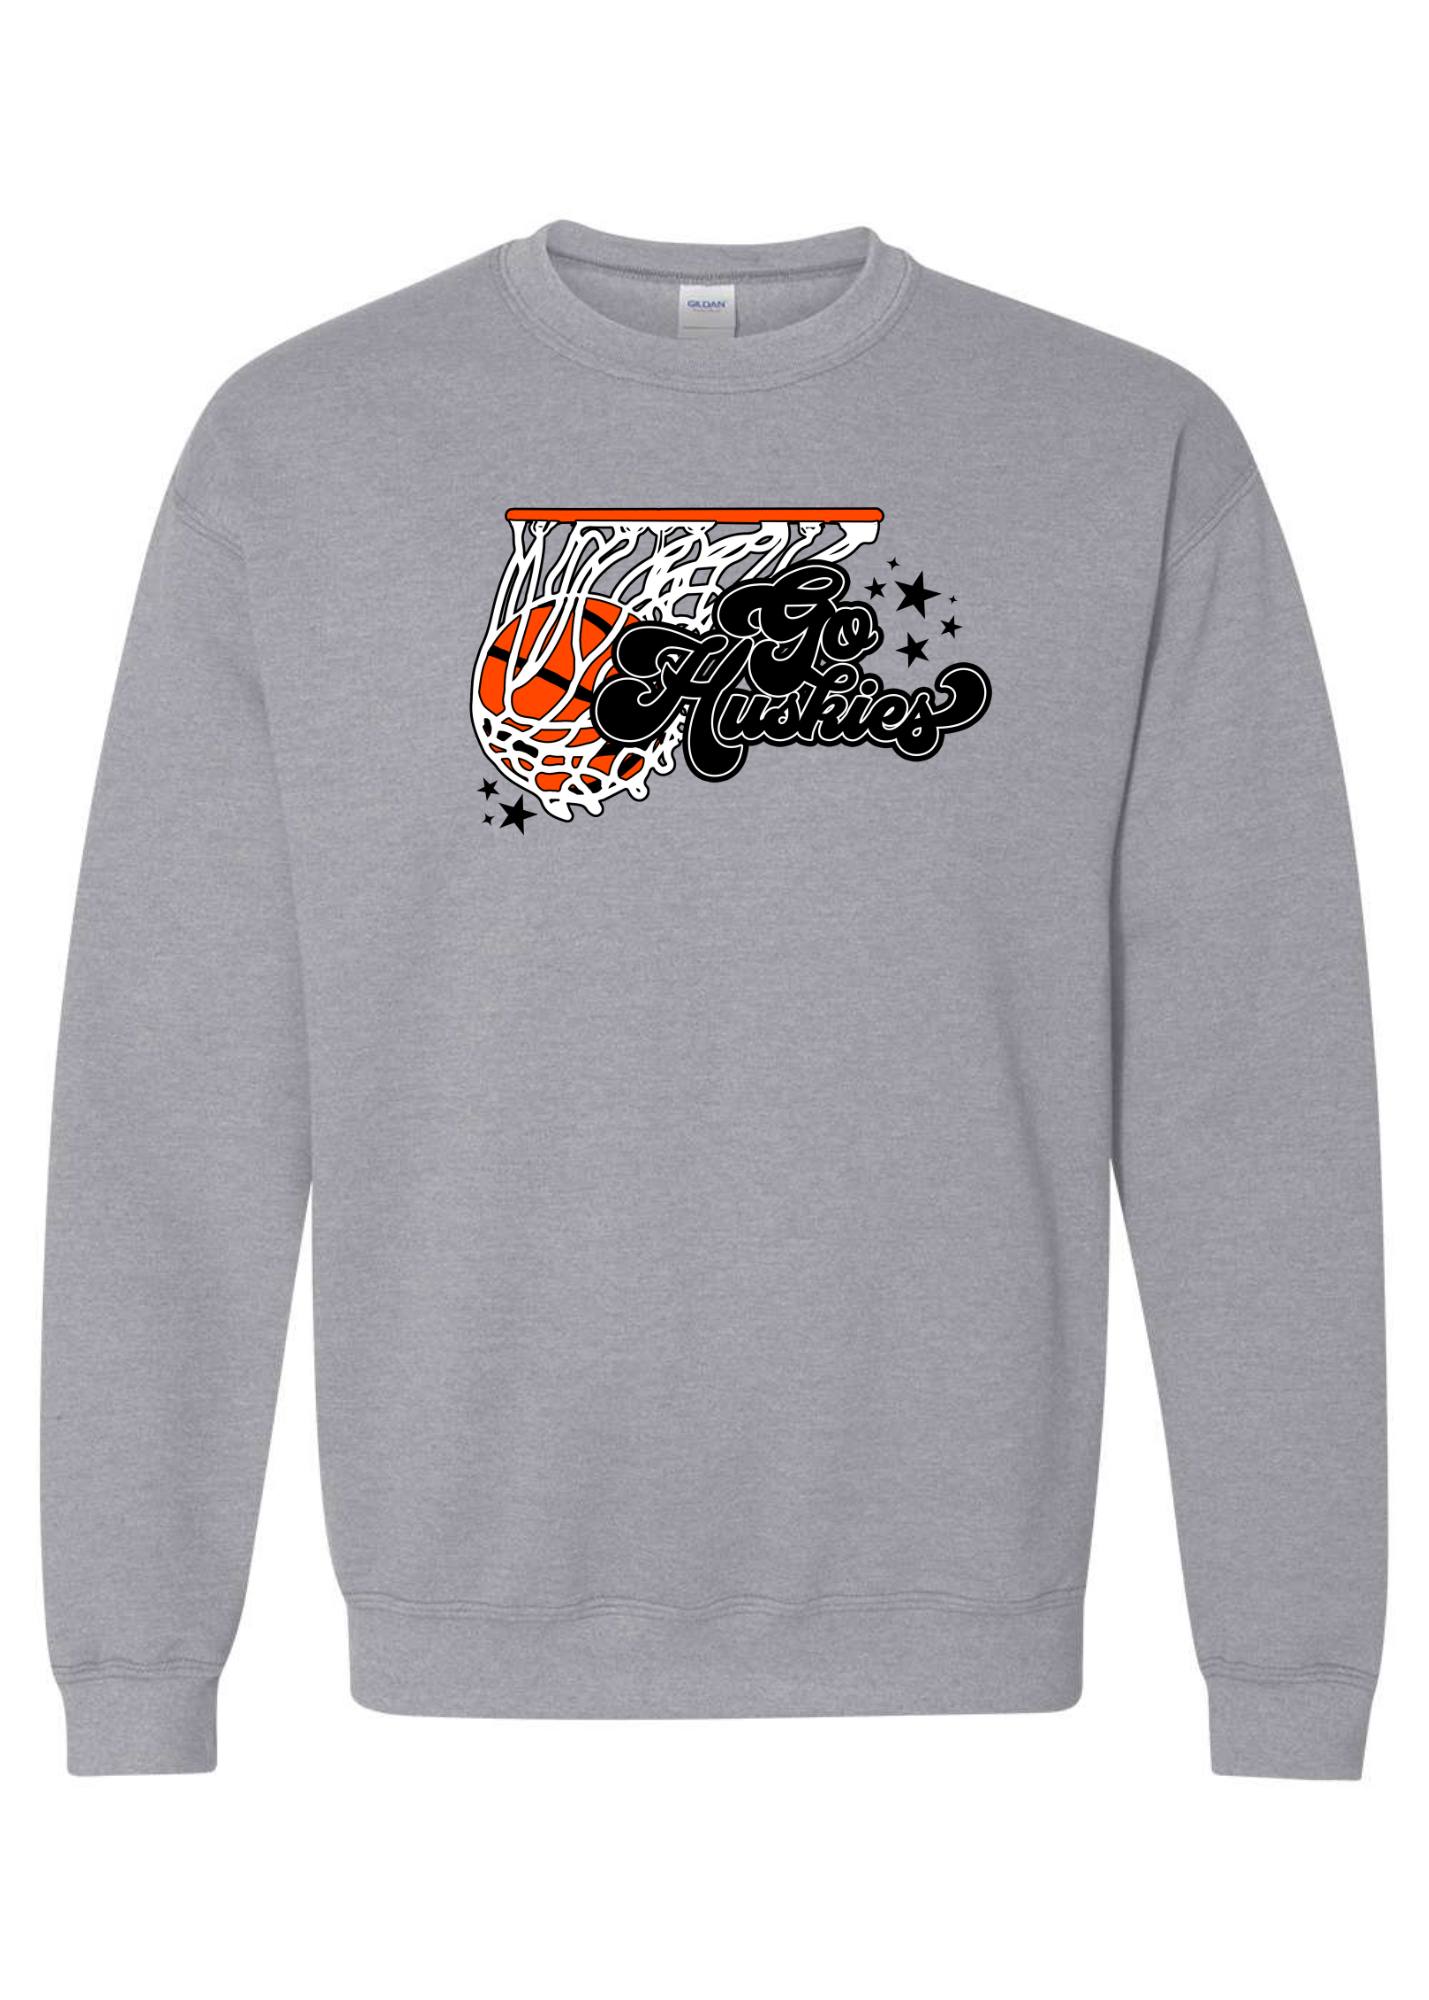 Go Huskies Basketball | Adult Pullover-Adult Pullover-Sister Shirts-Sister Shirts, Cute & Custom Tees for Mama & Littles in Trussville, Alabama.